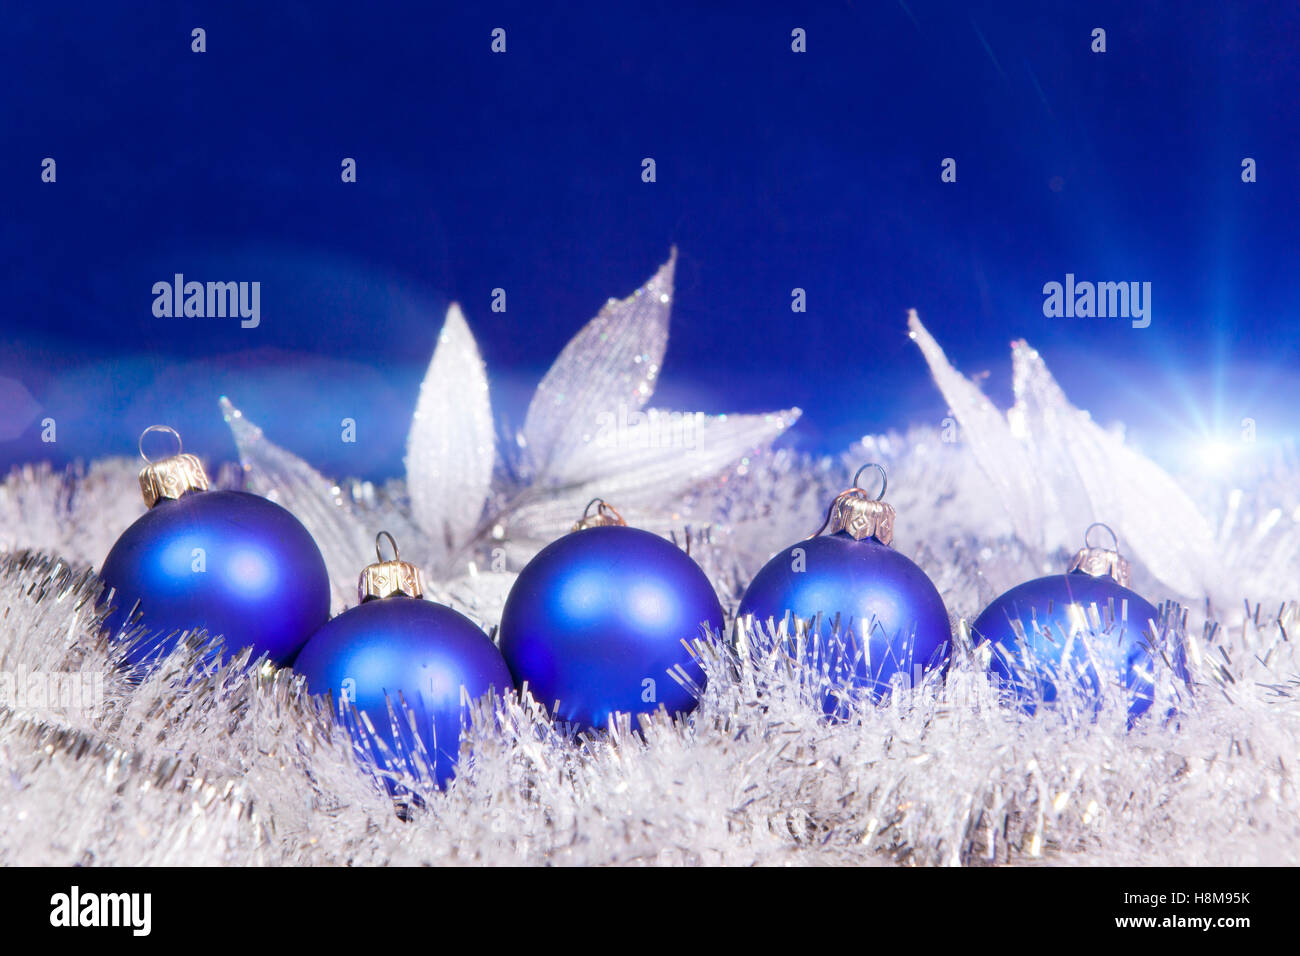 Blue New Year's balls and tinsel on a blue background Stock Photo